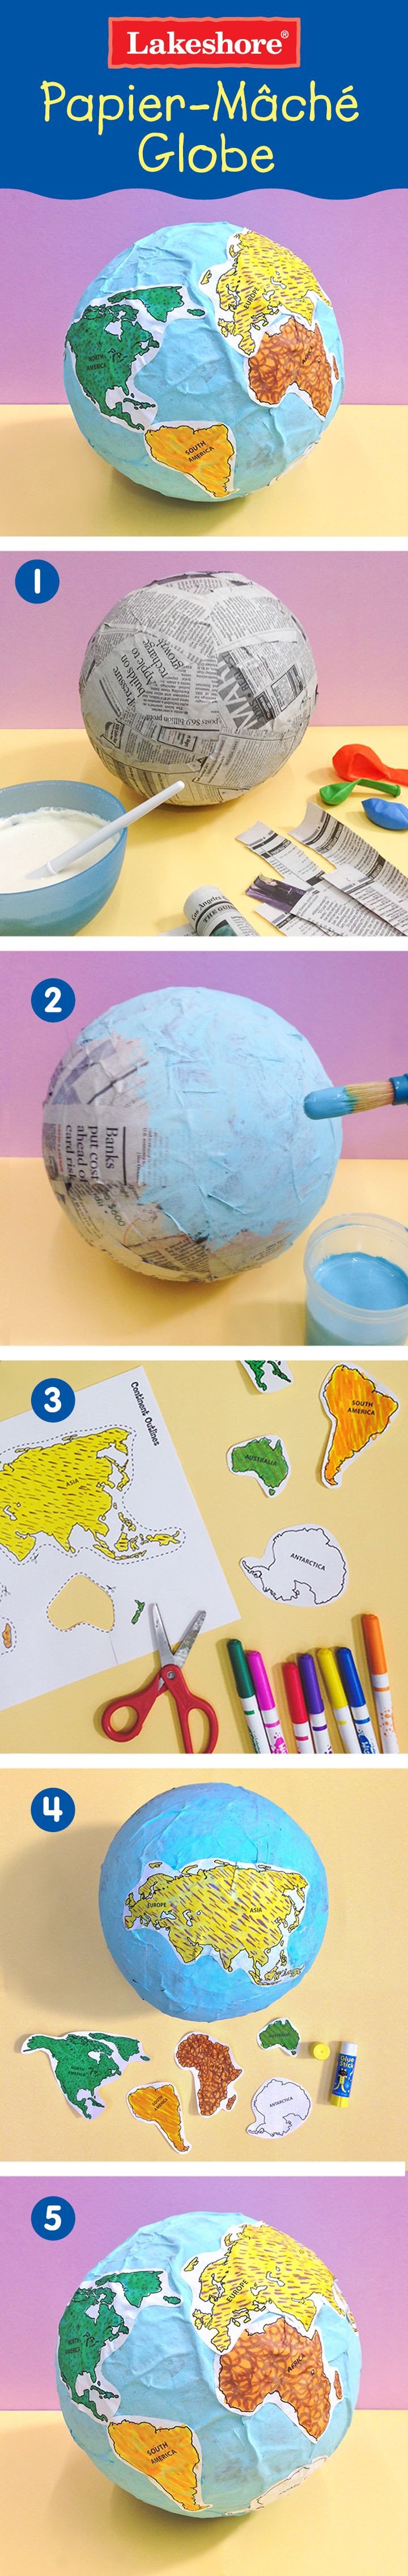 25 best ideas about History Projects on Pinterest